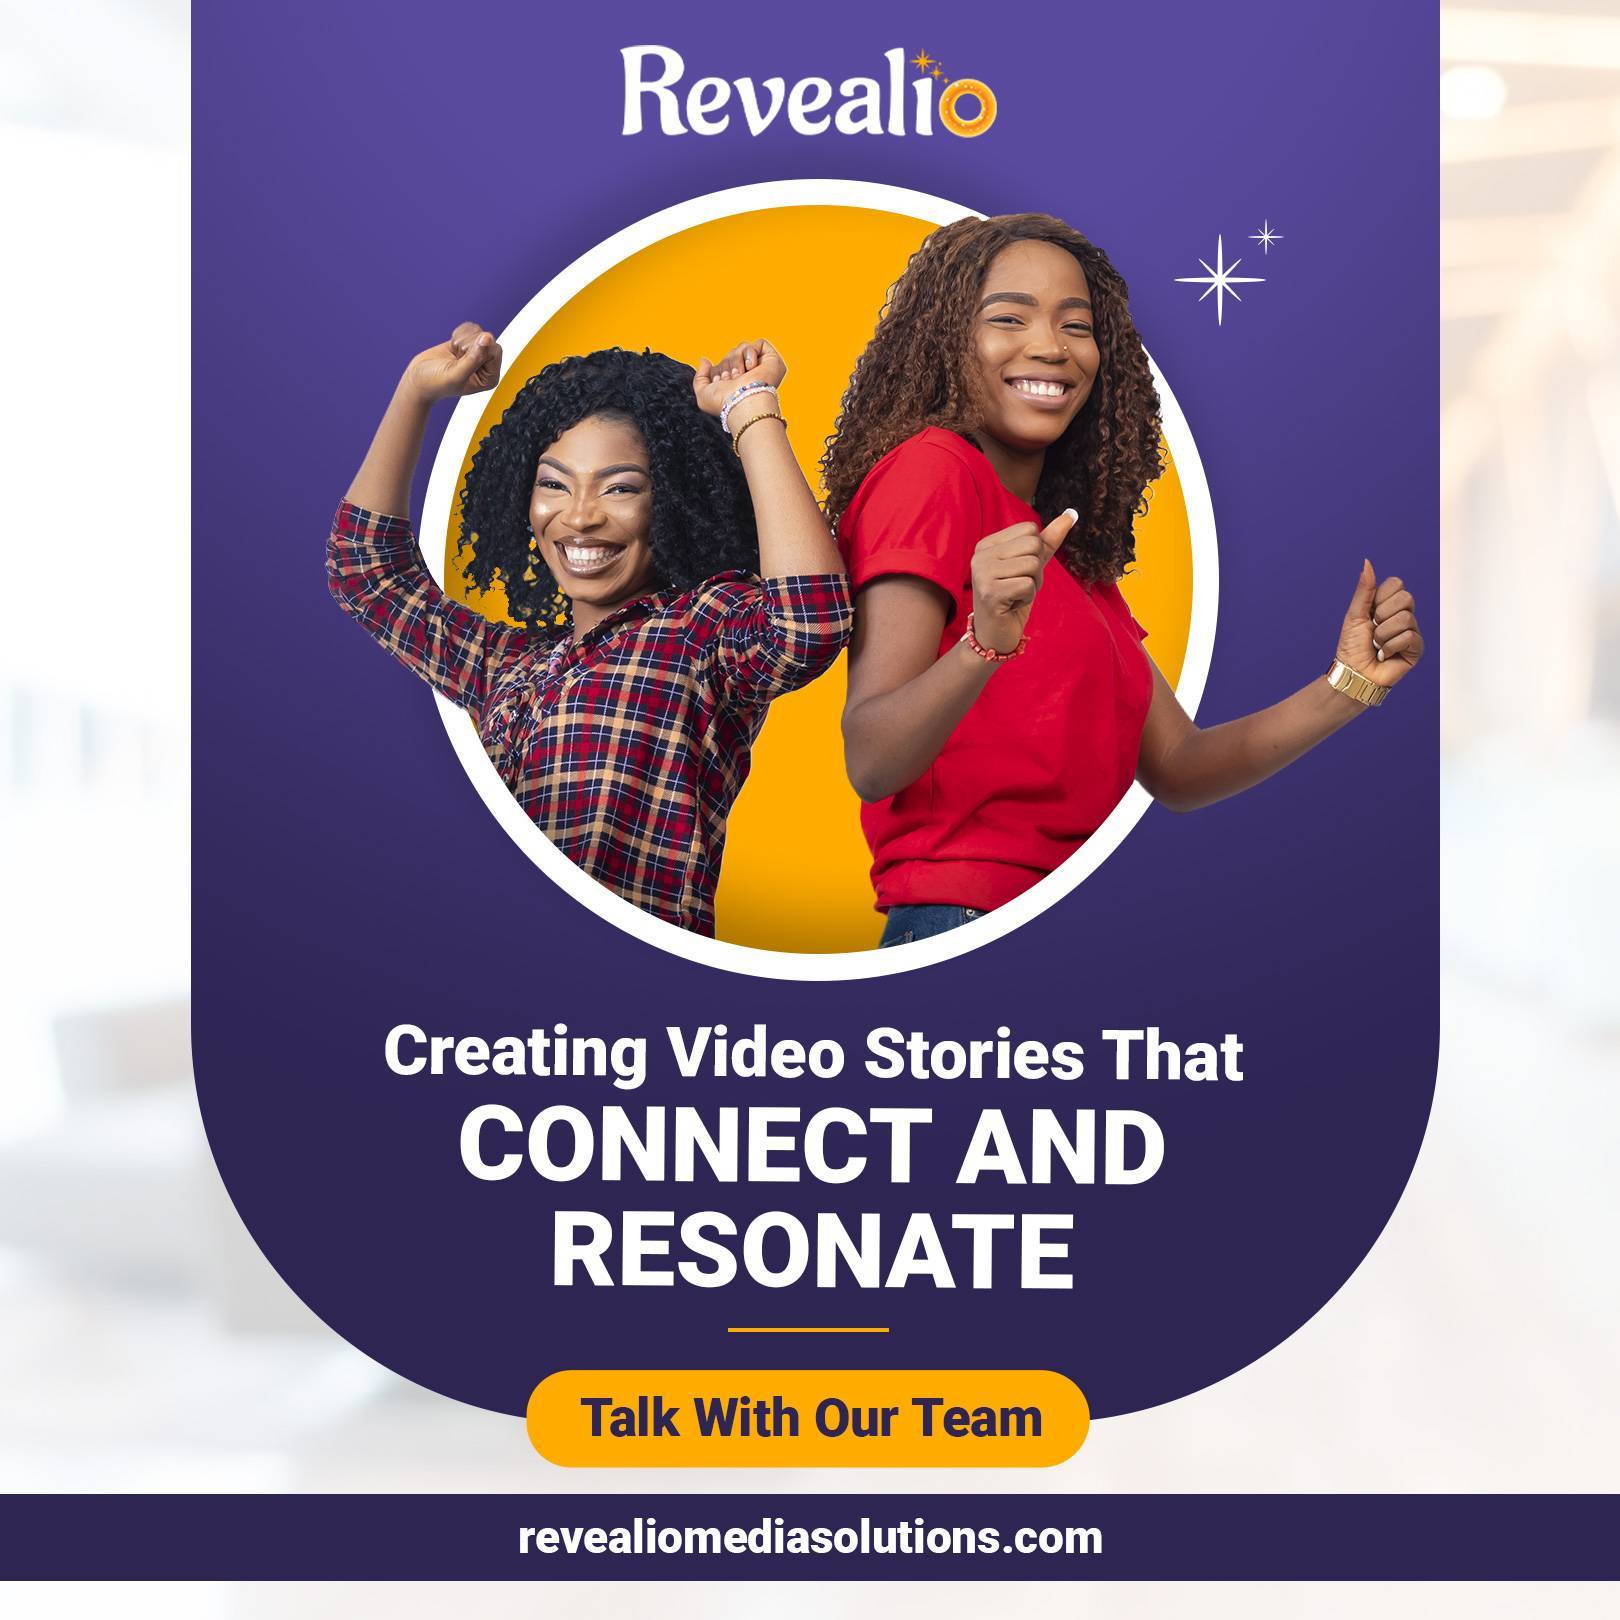 Create videos that connect and resonate